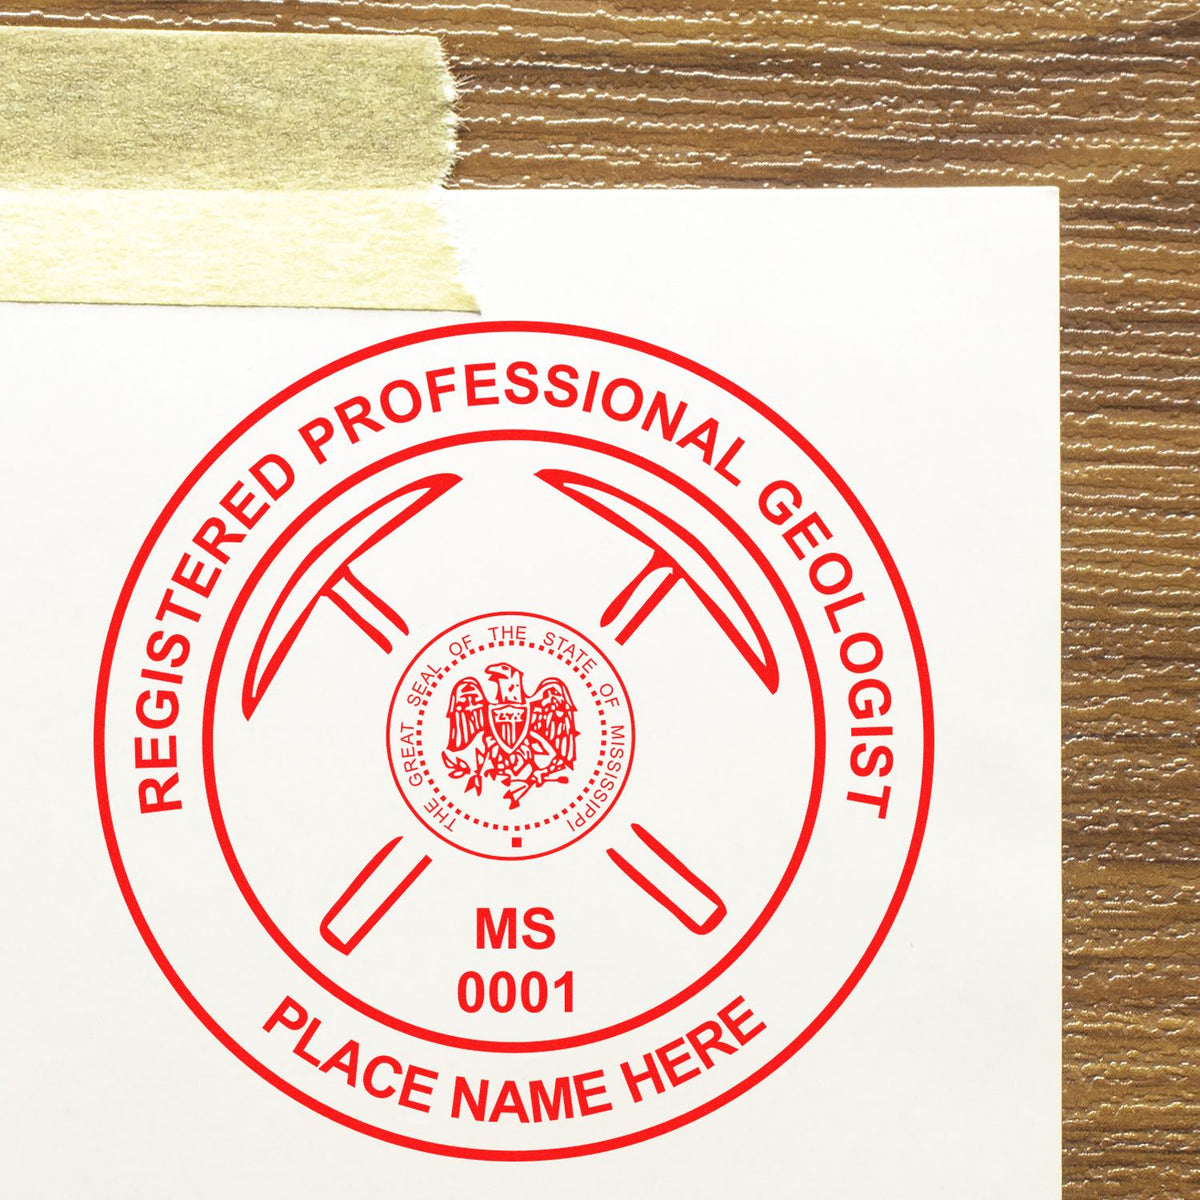 The Premium MaxLight Pre-Inked Mississippi Geology Stamp stamp impression comes to life with a crisp, detailed image stamped on paper - showcasing true professional quality.